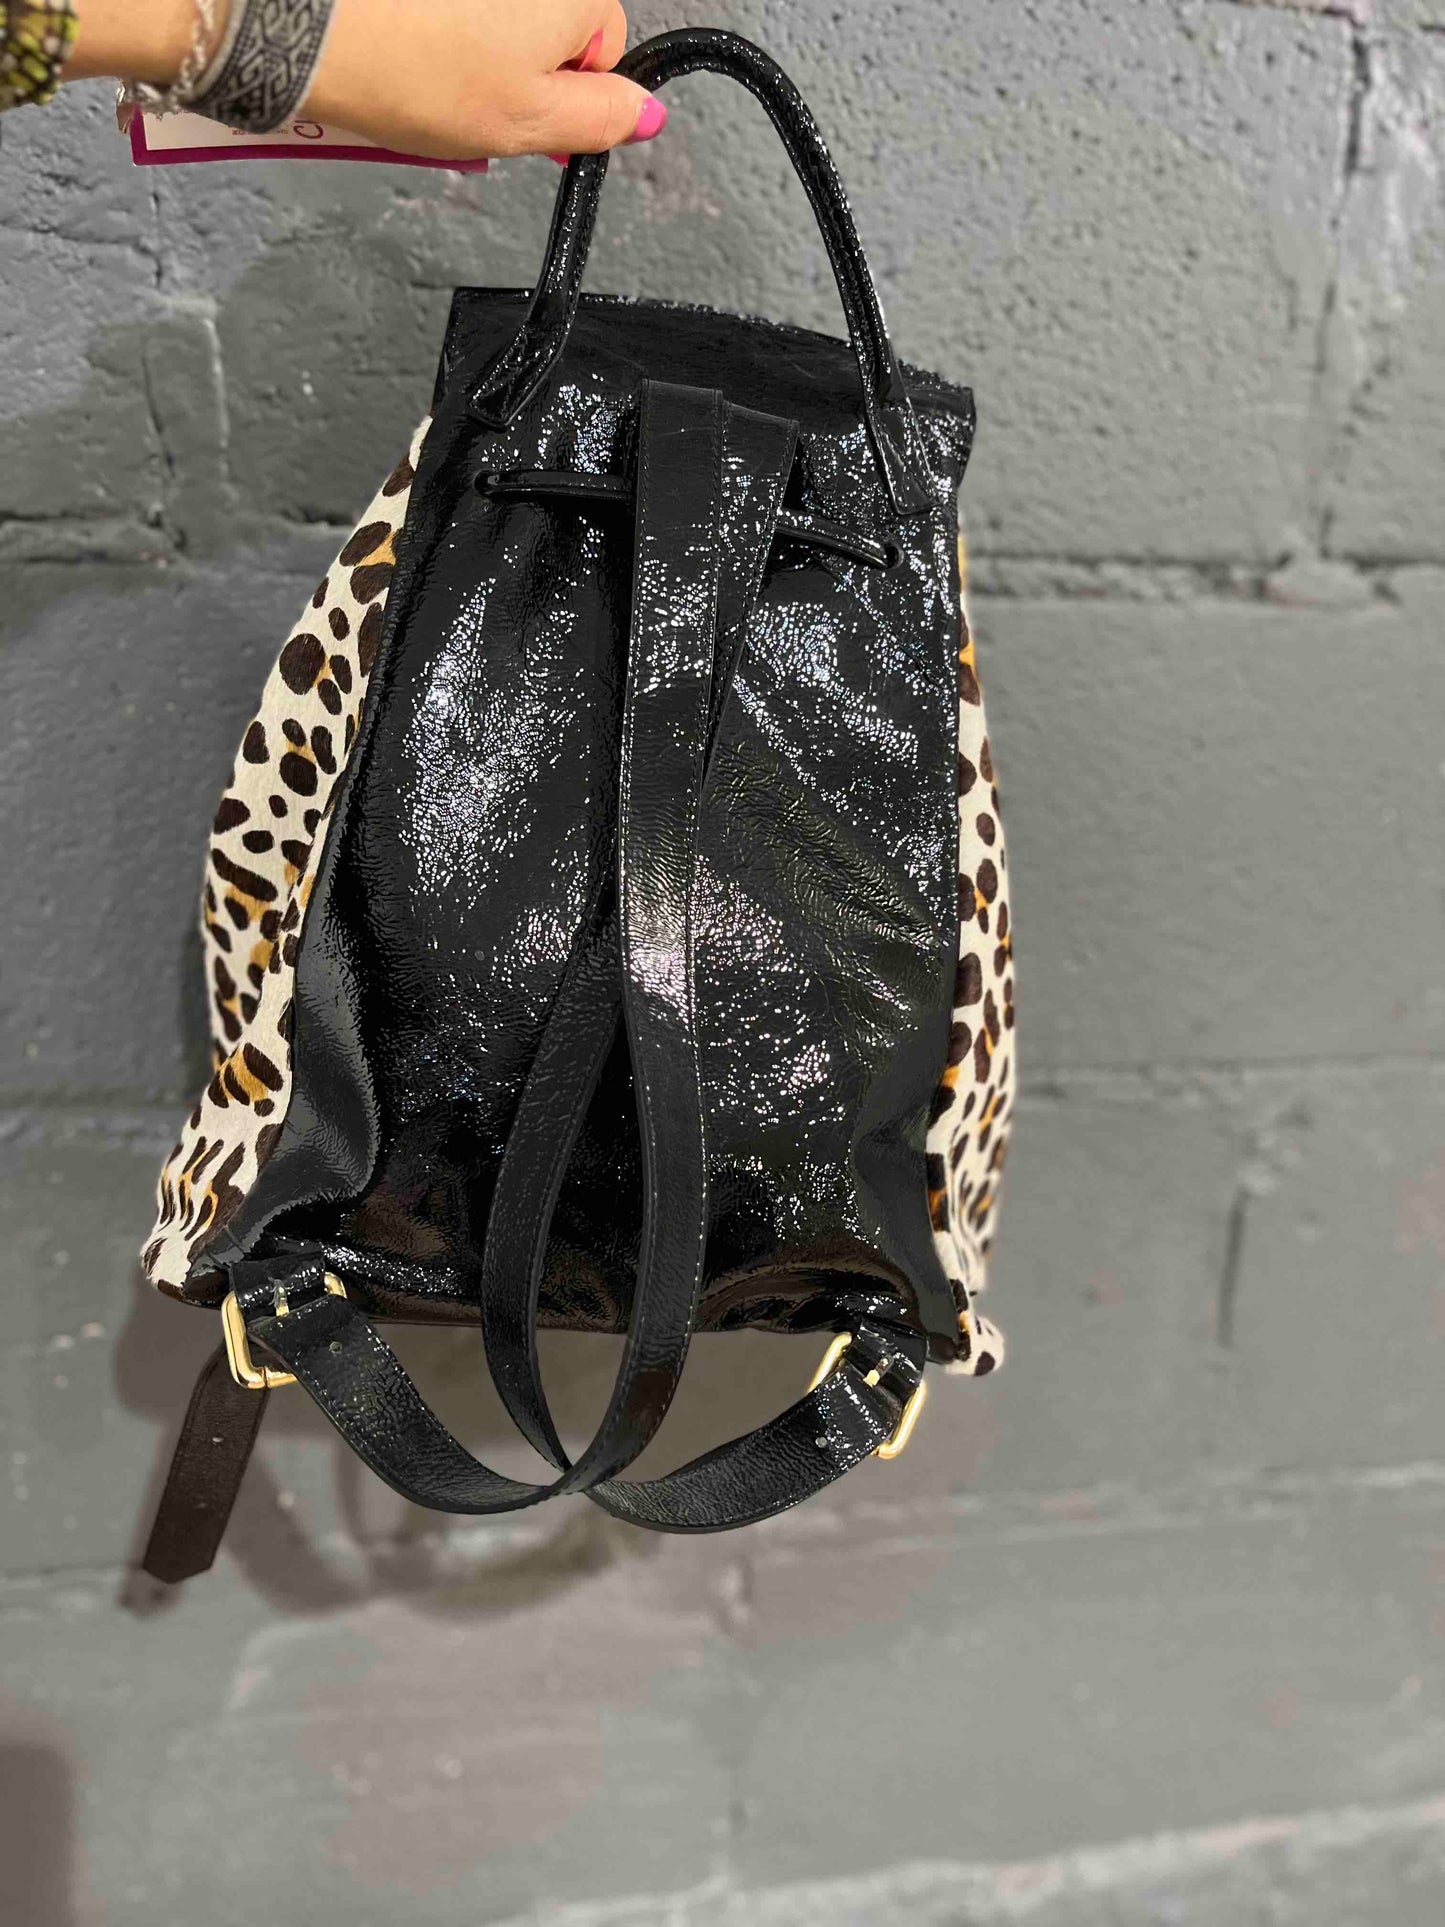 Allez Leopard backpack- LAST ONE!